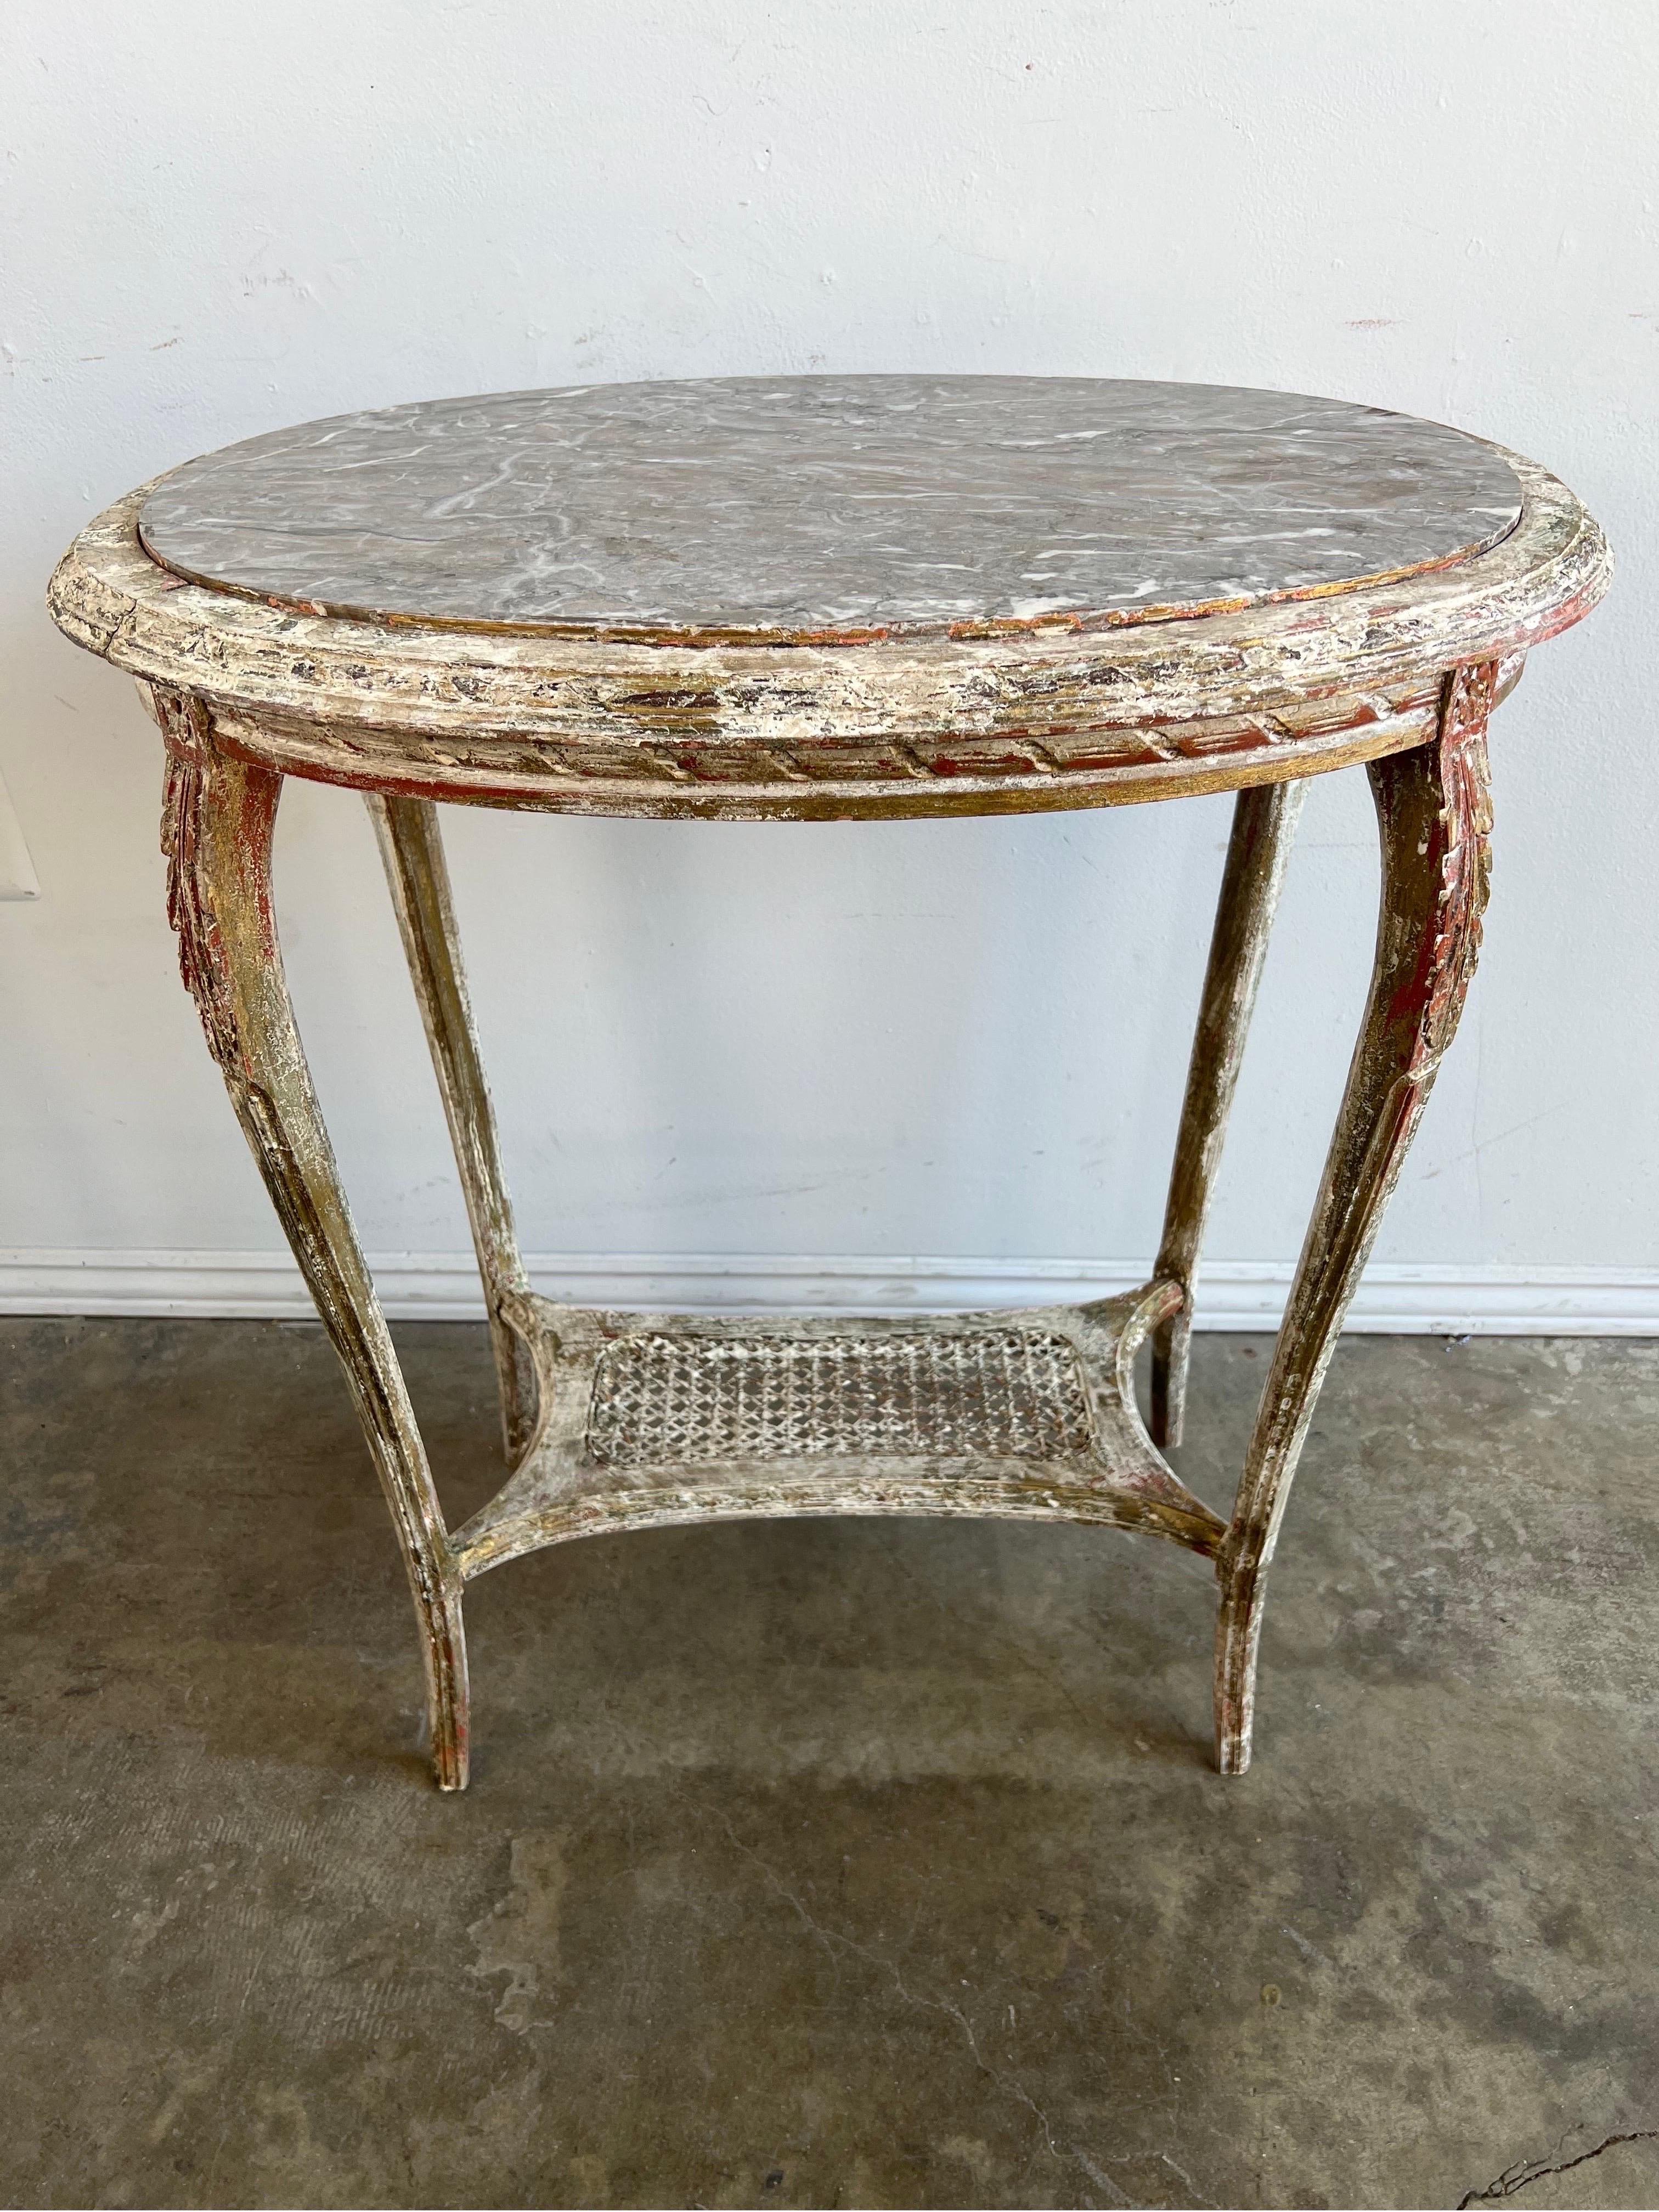 19th Century French oval carved wood & cane side table. The table stands on four elegant cabriole legs that meet at a bottom cane shelf. Great worn painted finish with bits of gold leaf seen throughout. Grayish taupe oval shaped marble inset top.